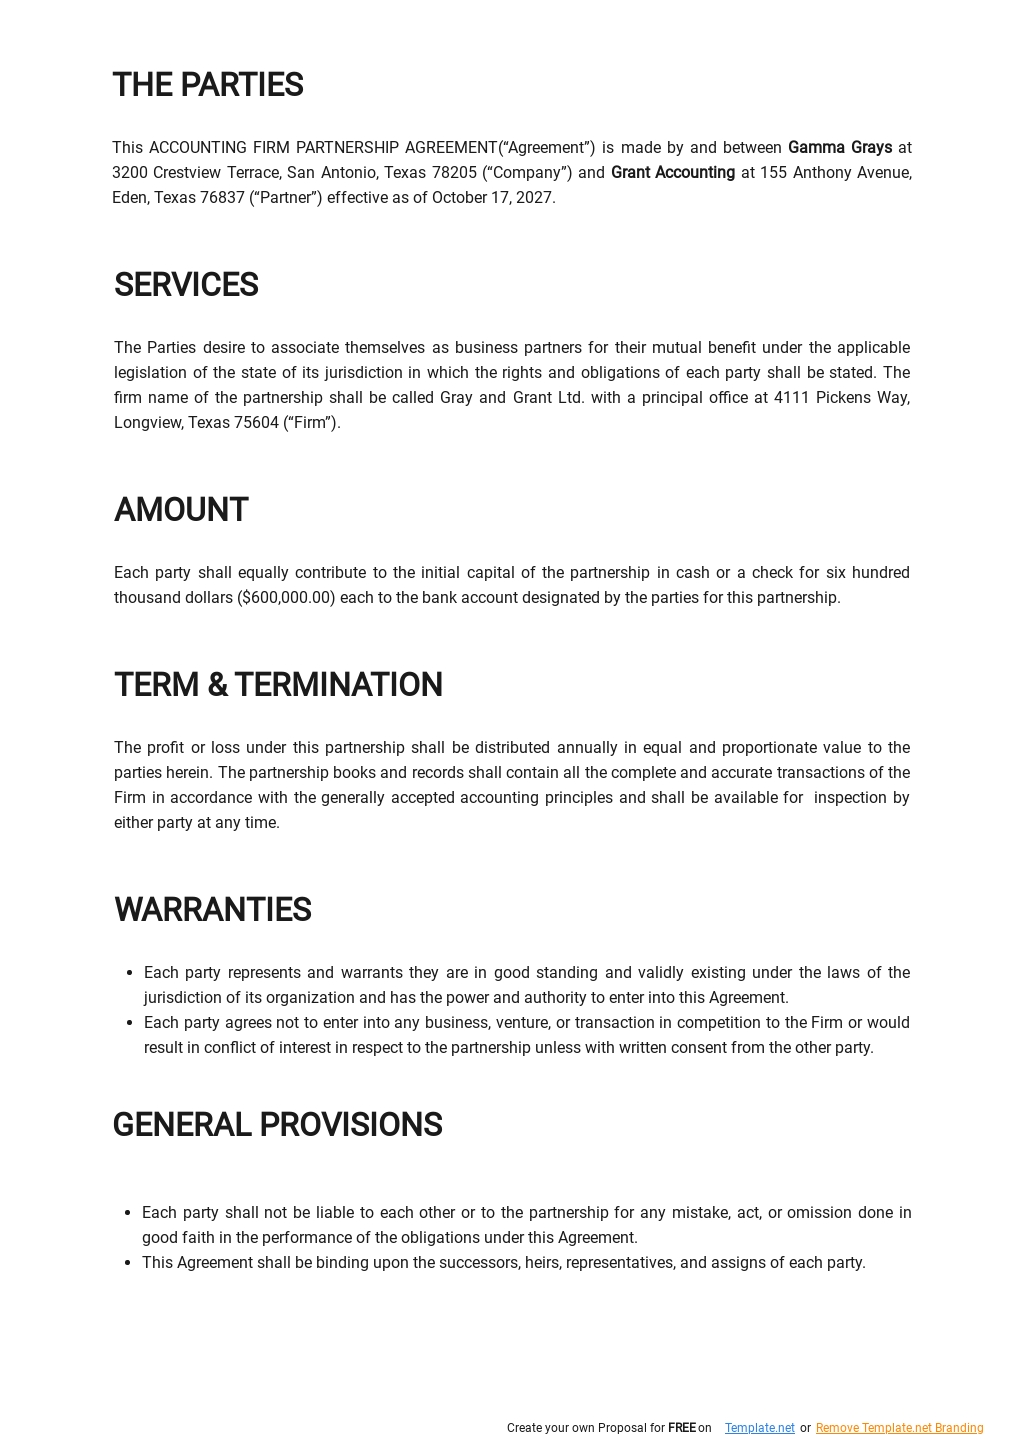 Free Accounting Firm Partnership Agreement Template 1.jpe